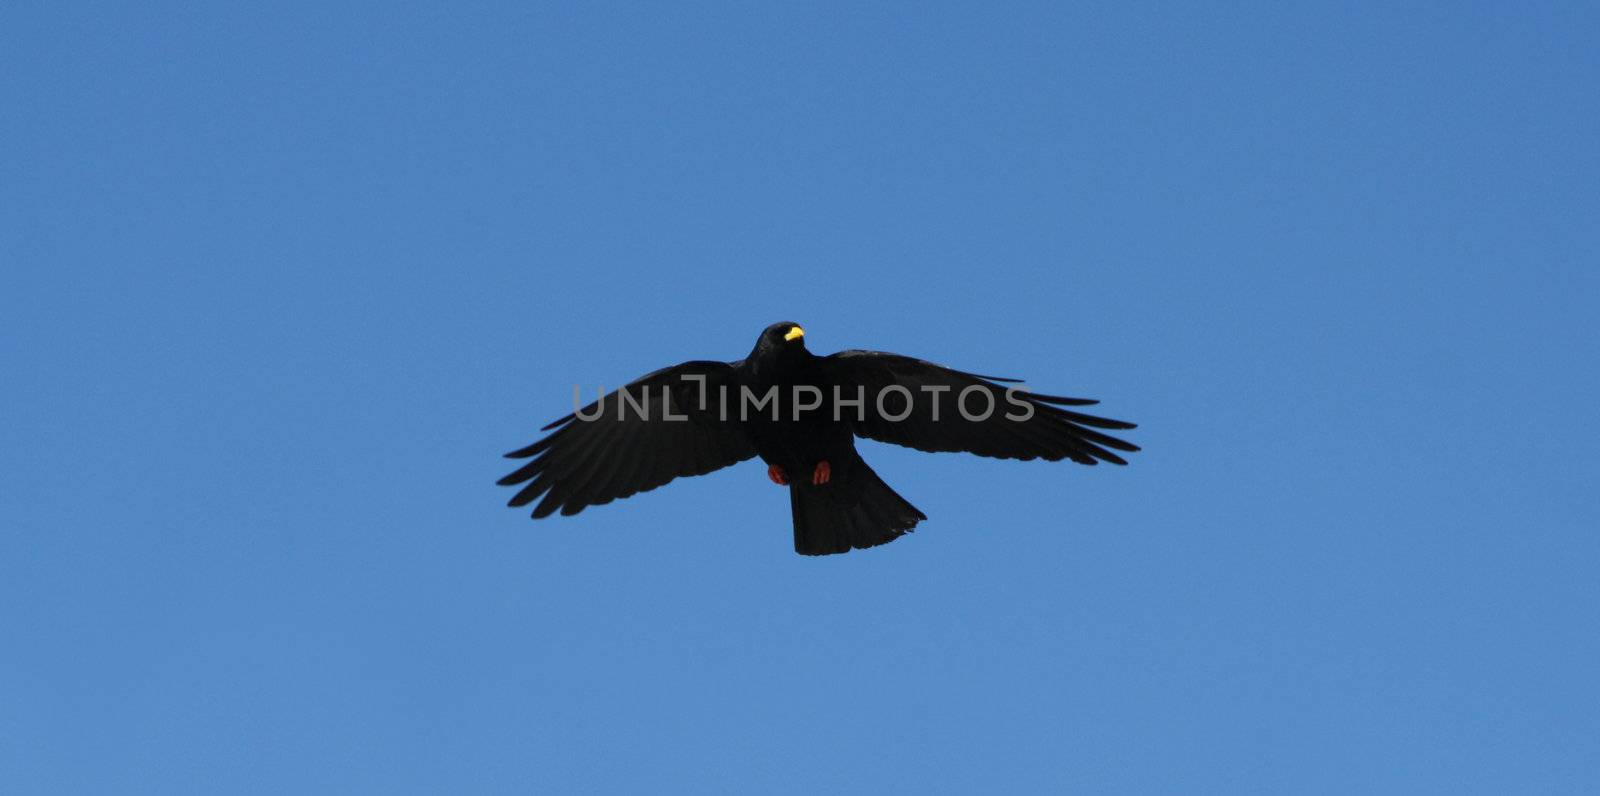 A black crow flies at the blue sky